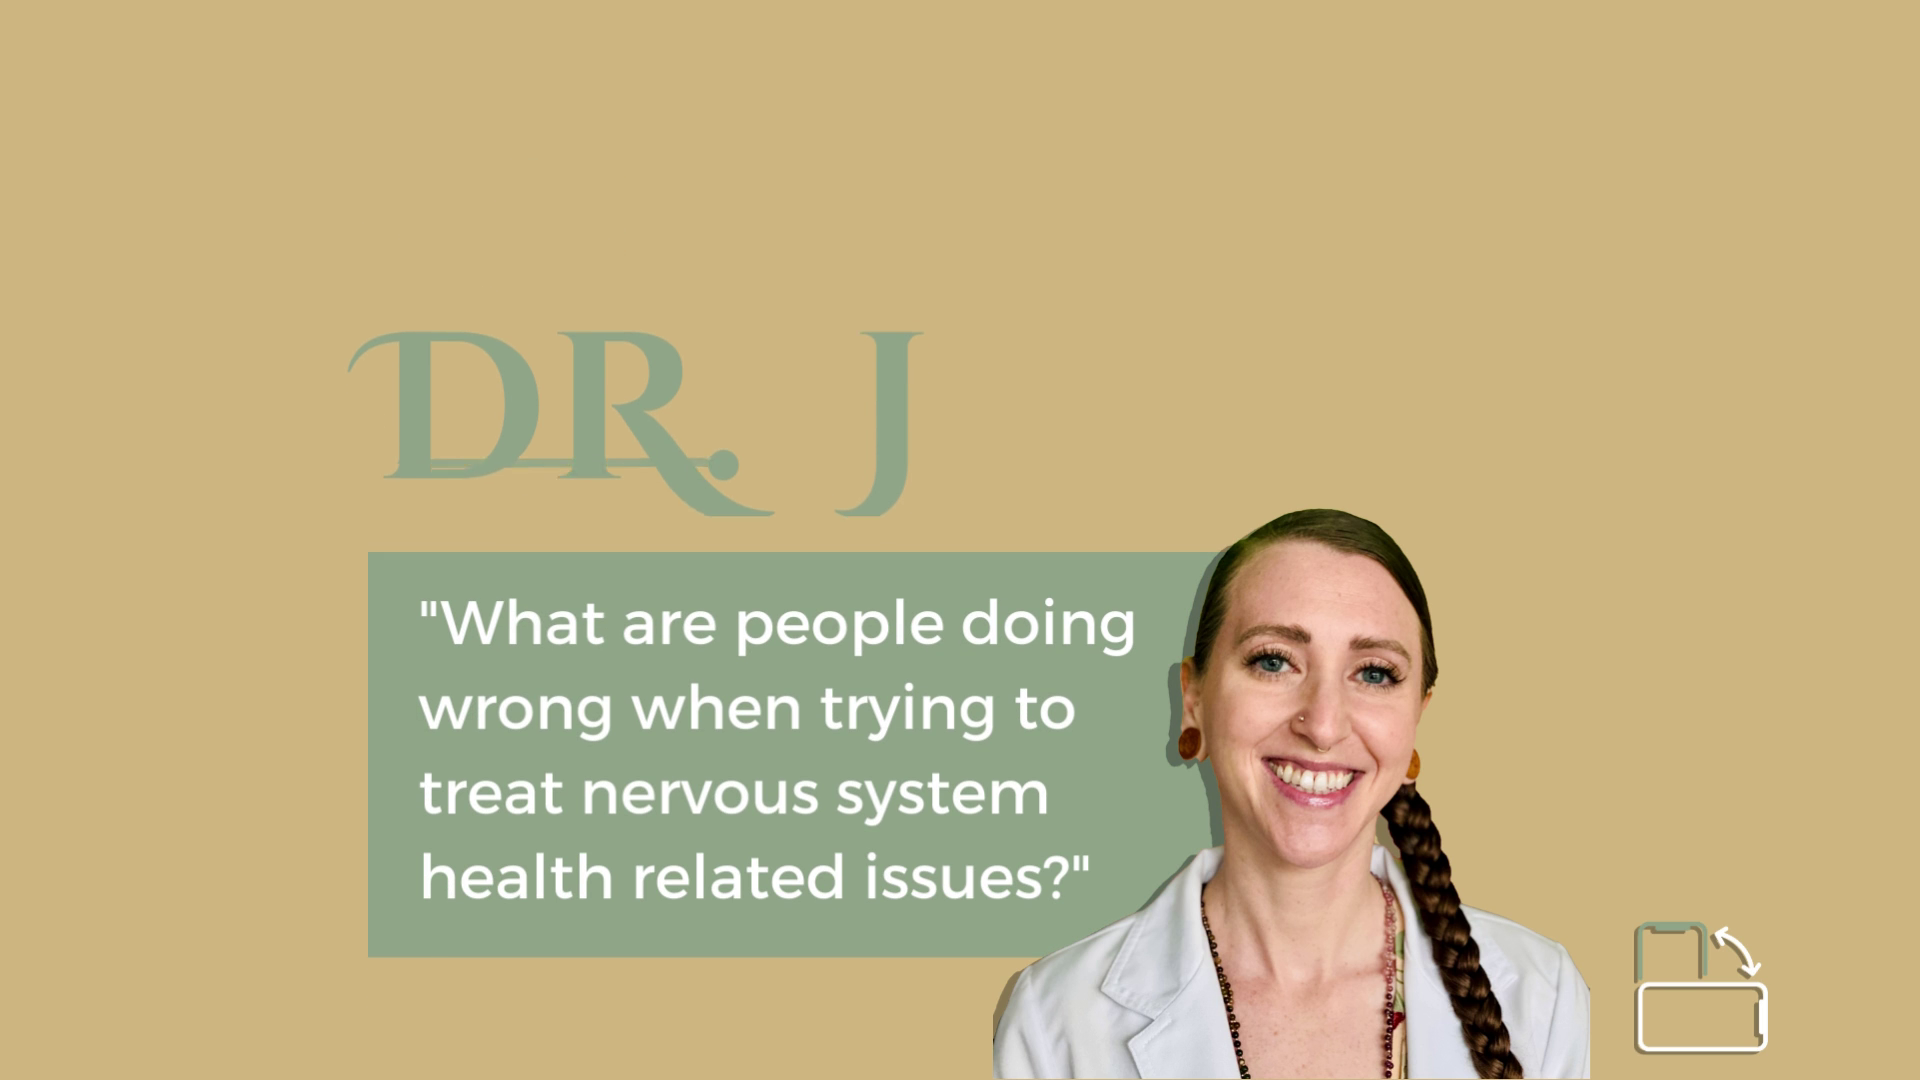 Load video: What are people doing wrong when trying to treat nervous system health related issues?